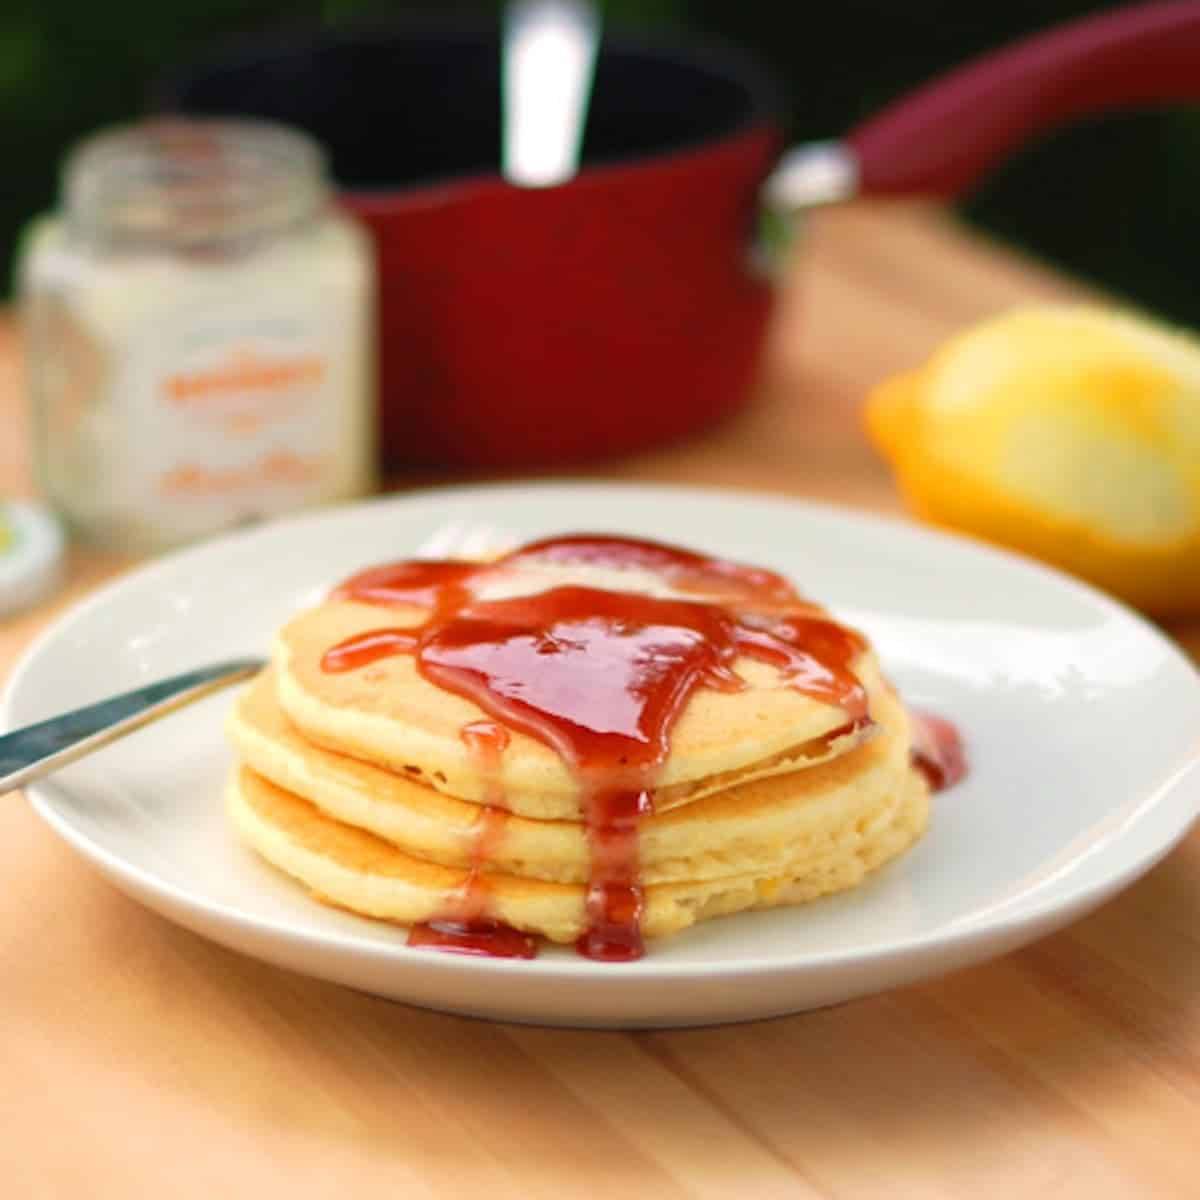 Lemon Pancakes topped with a blackberry syrup made from blackberry jam.